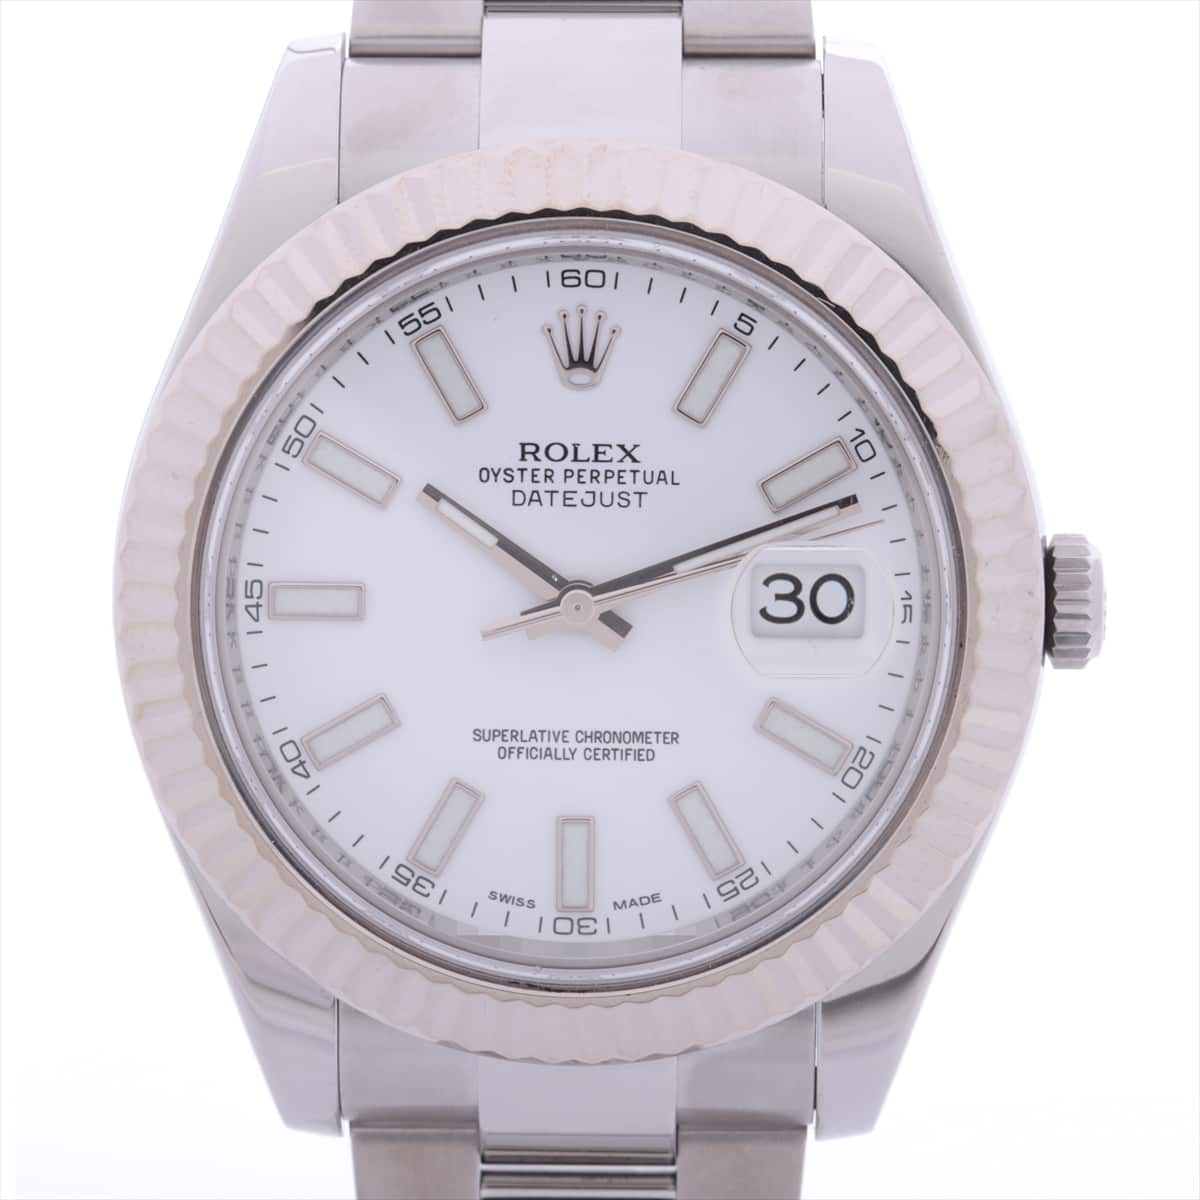 Rolex Datejust 116334 SS×WG AT White-Face Extra-Link3 Cyclop lens small scratches